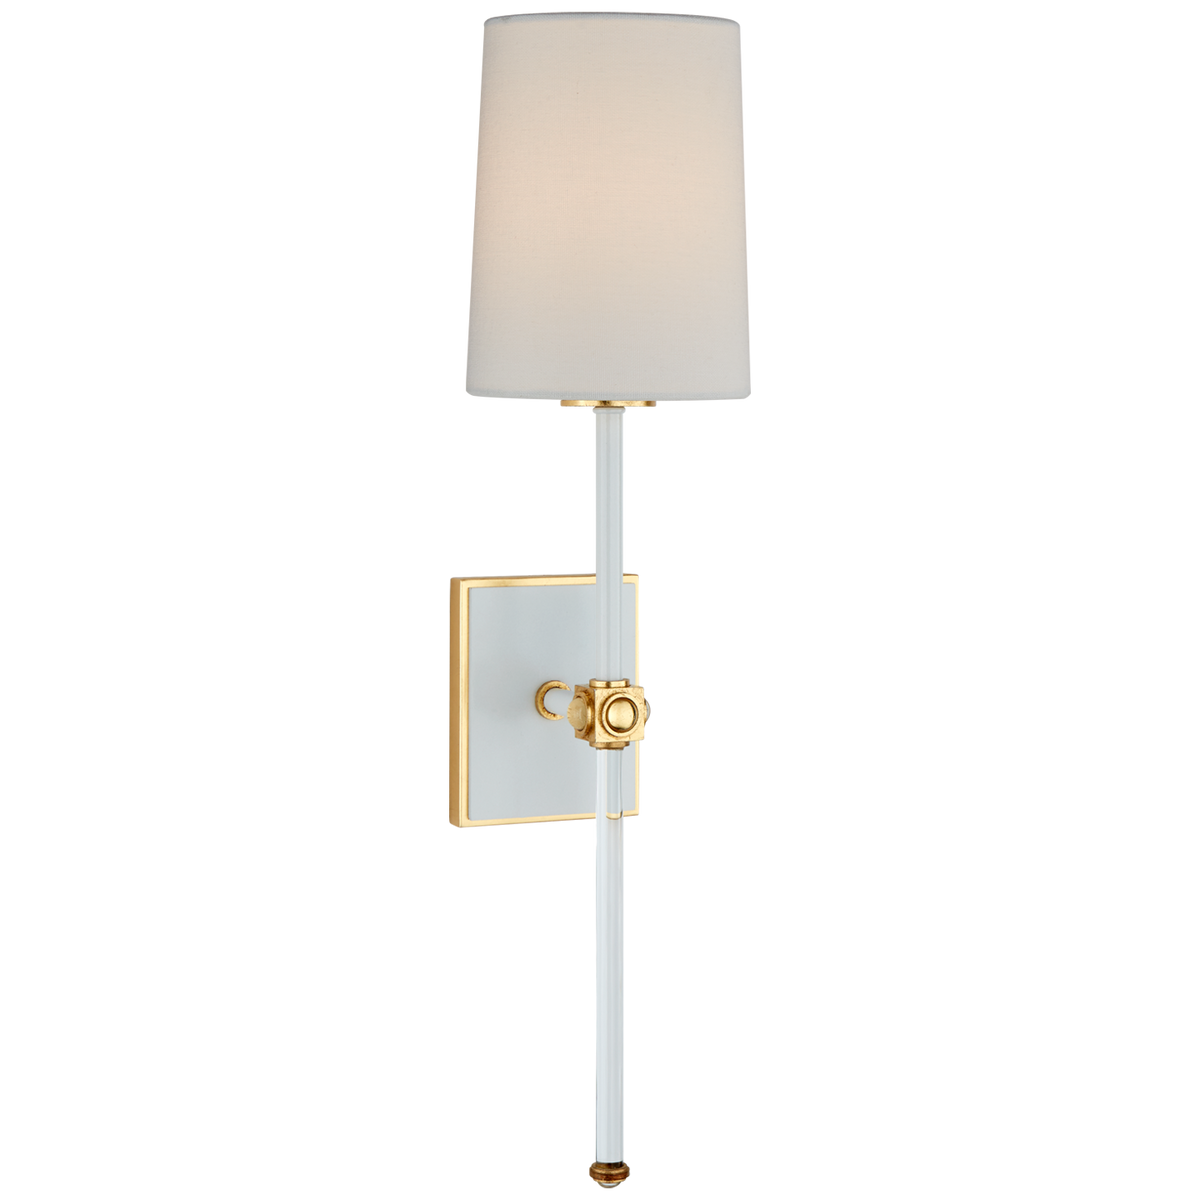 Lucia Sconce Medium Tail - Matte White and Crystal with Linen Shade